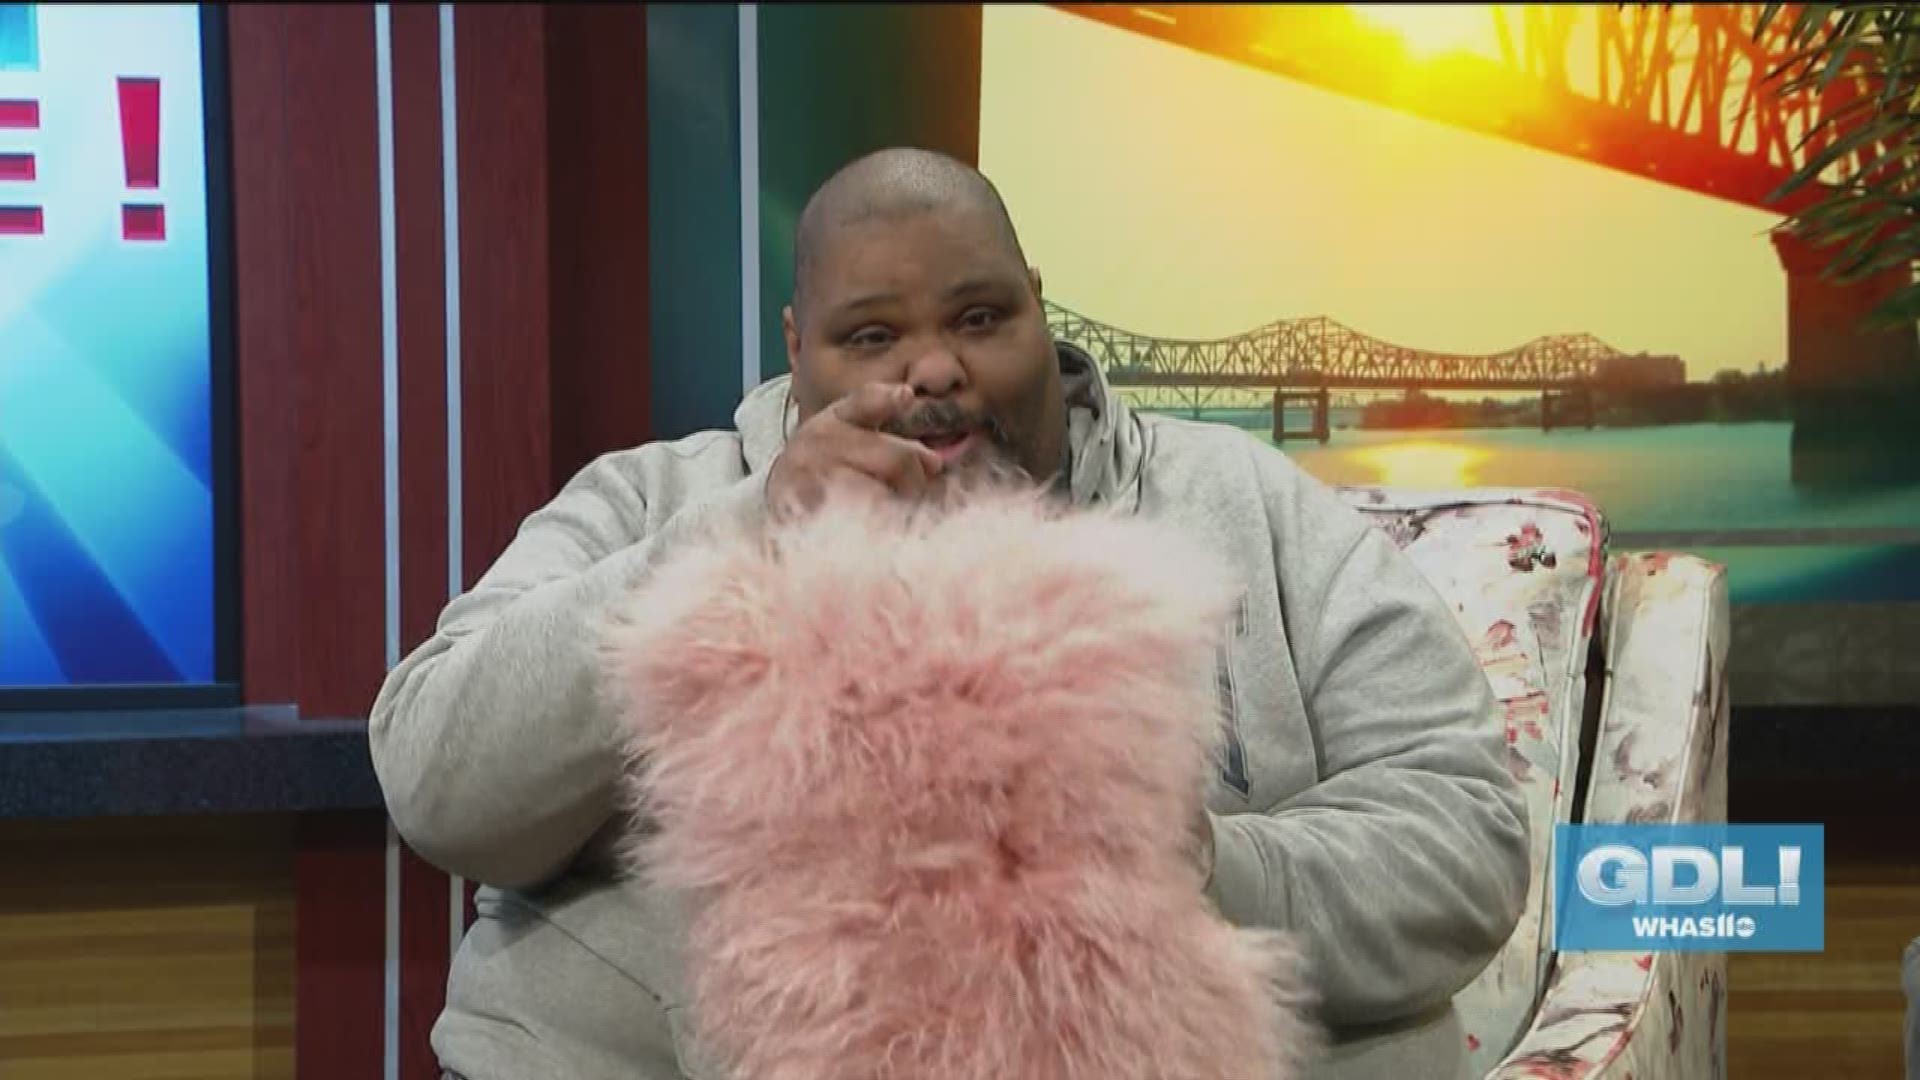 Stand-up comedian Mo Alexander stopped by Great Day Live before a weekend of performances at Jeffersonville's Comedy by the Bridge.